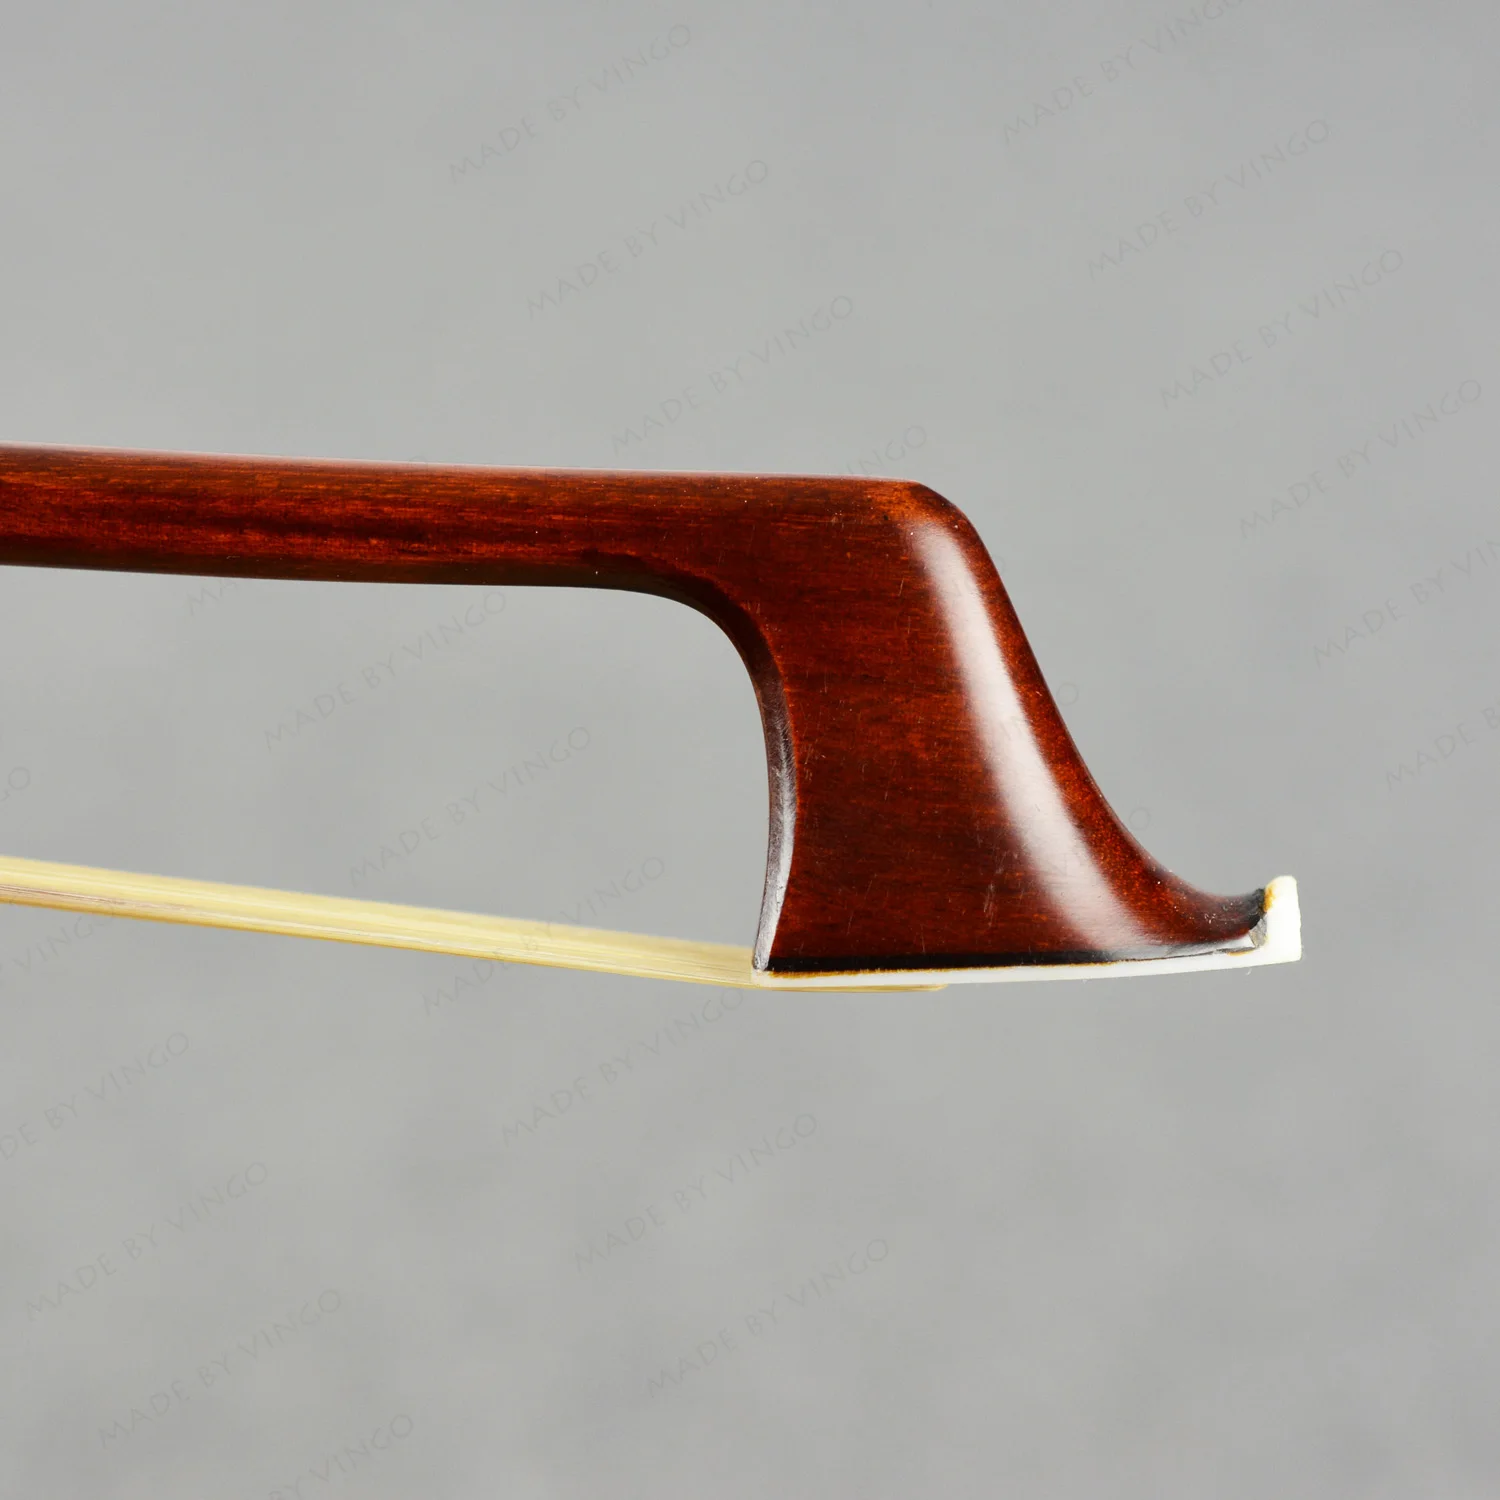 Master 4 Sizes Pernambuco CELLO BOW 813C Ebony Frog New Arrivals Natural Horsehair Cello Parts High cost-performance enlarge